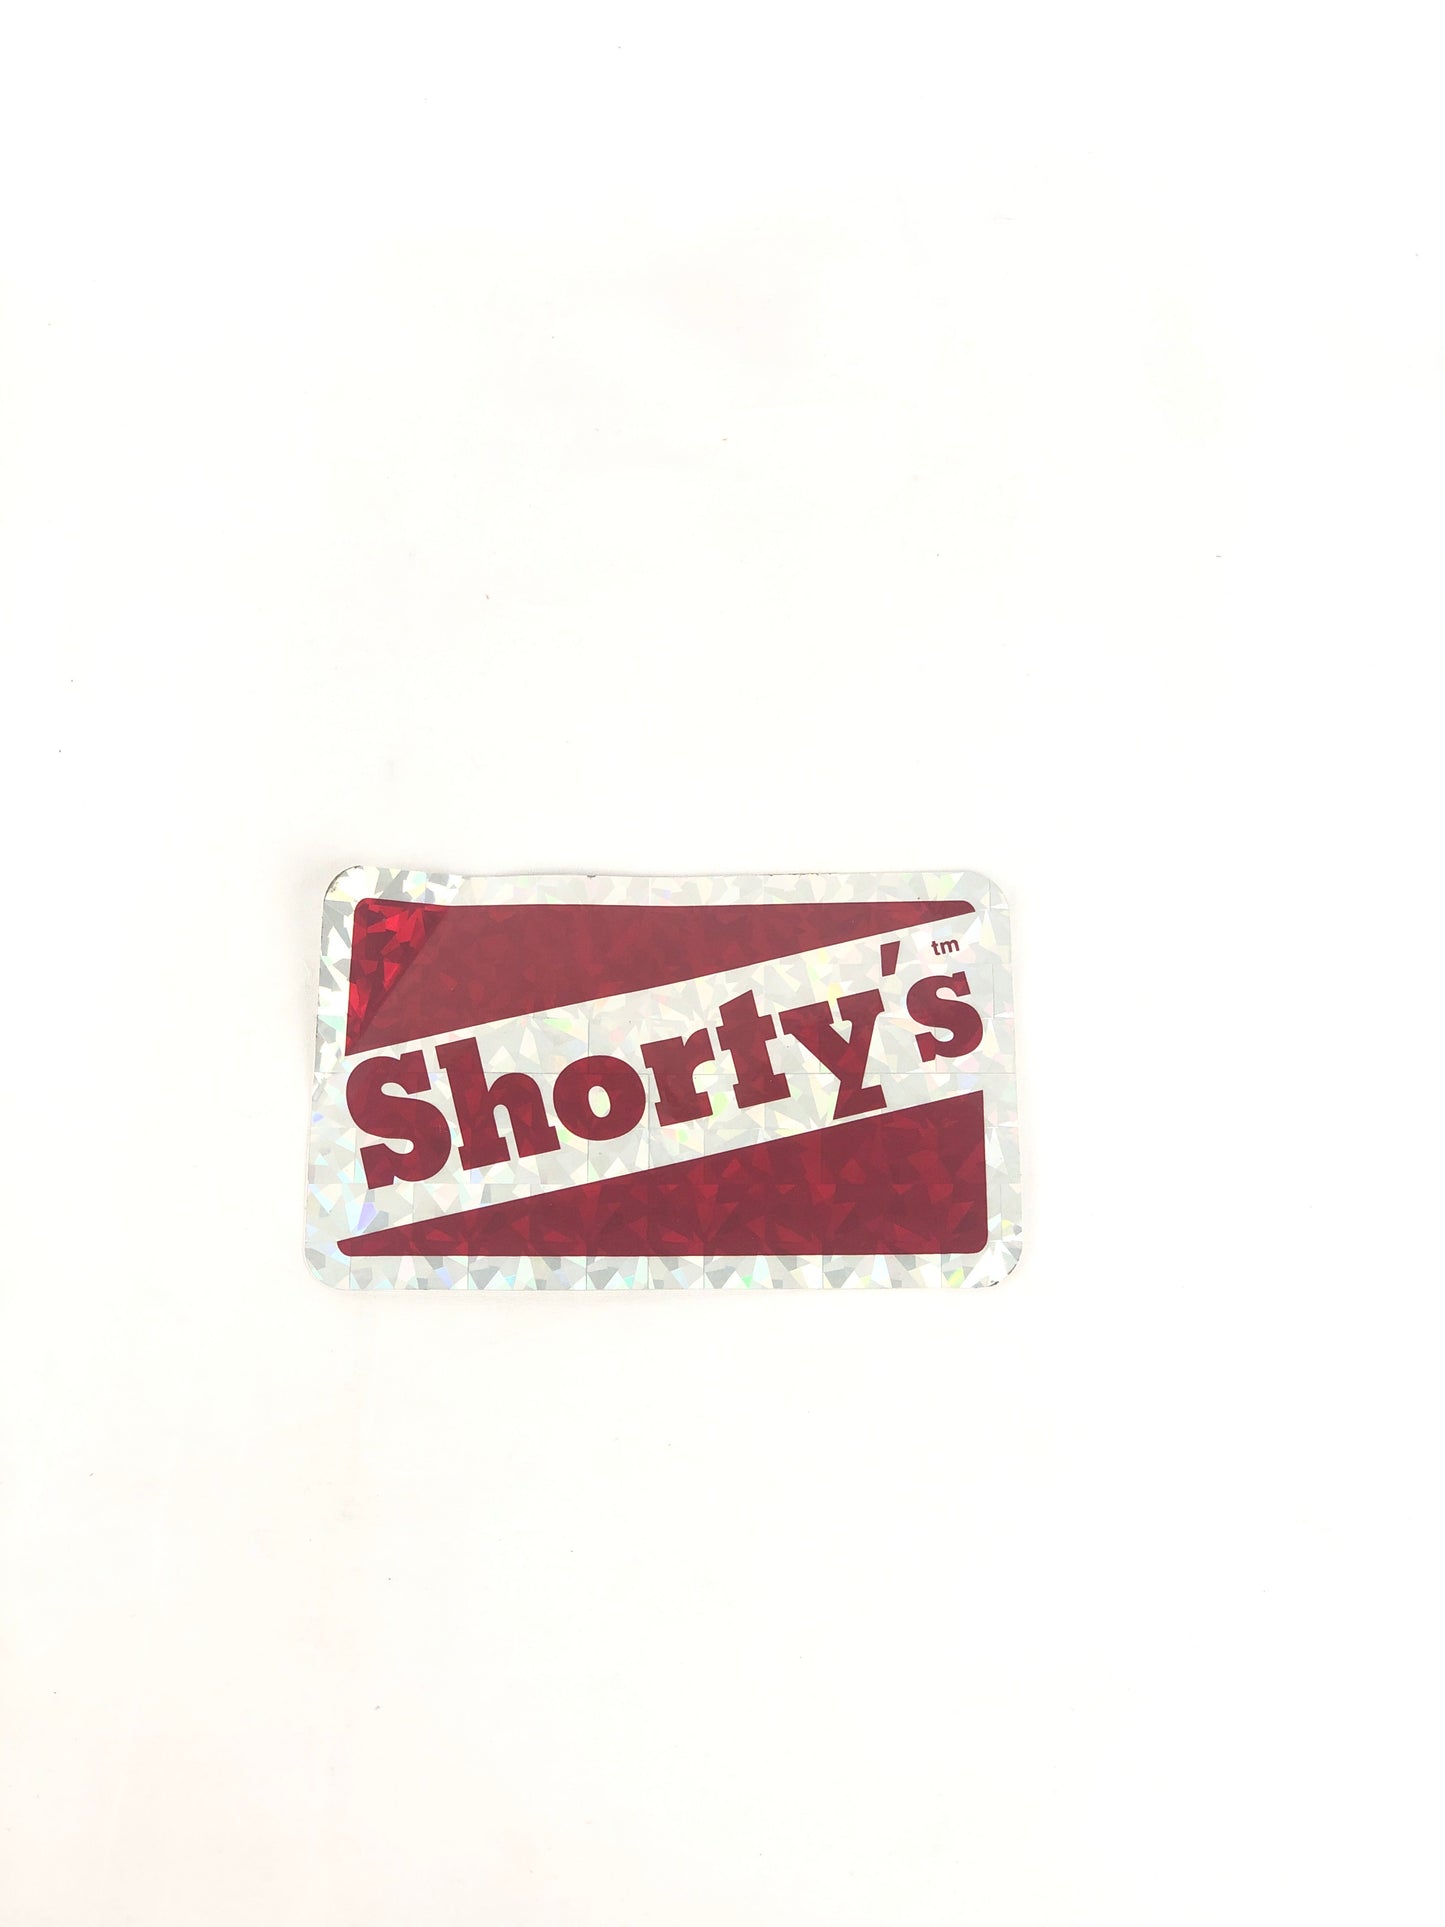 Shorty's Hardware Holographic Foil Red 4" x 3.7" Sticker